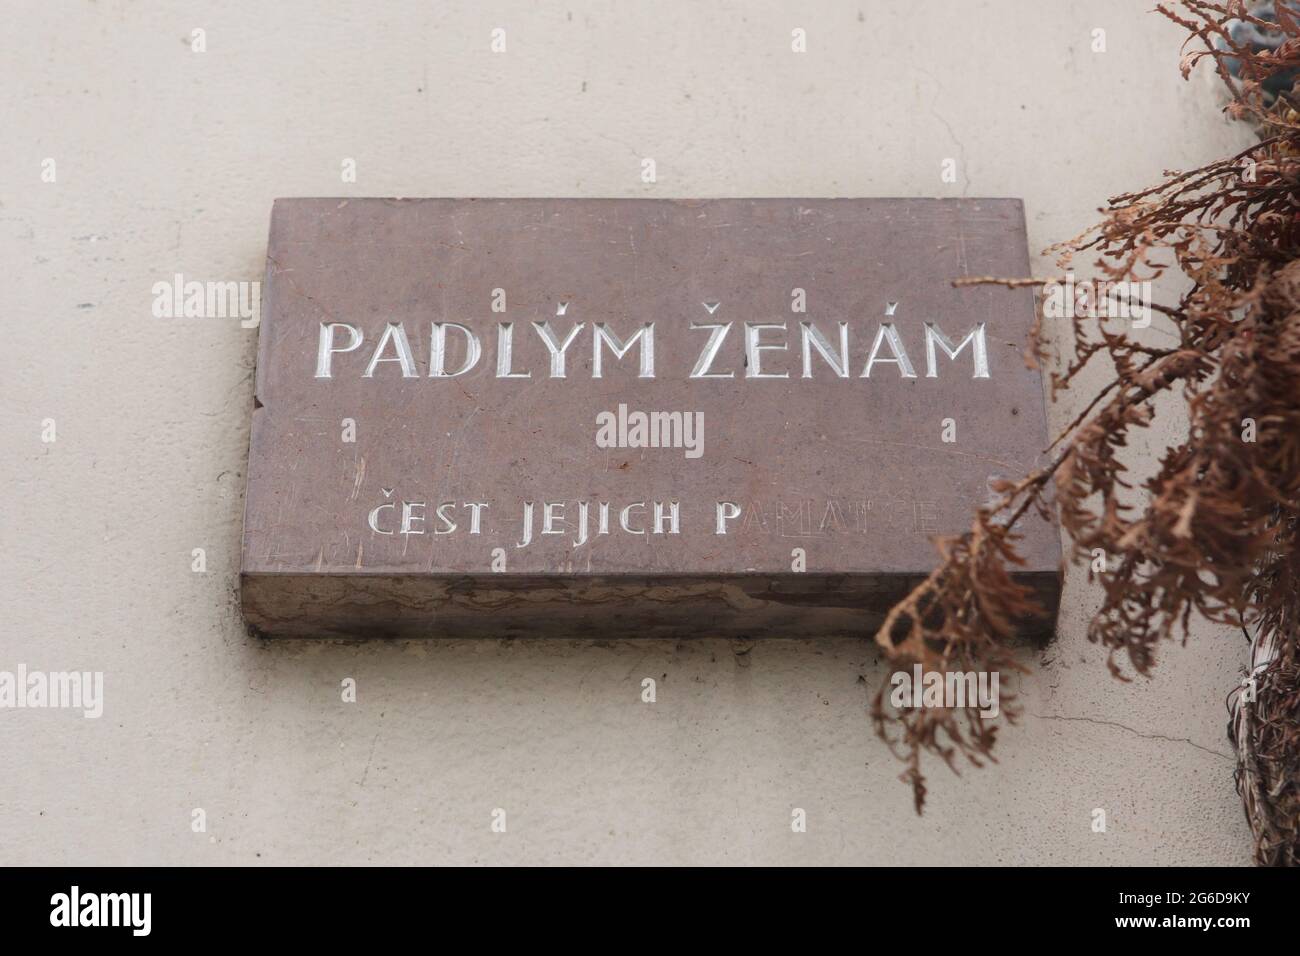 Commemorative plaque devoted to Prague prostitutes placed on the house in Perlová Street in Staré Město (Old Town) in Prague, Czech Republic. The inscription 'Padlým ženám' in Czech language on the plaque could be translated in two ways: 'To the Fallen Women' as well as 'To the Promiscuous Women'. The unfinished inscription bellow also could be finished and translated in two ways: 'The Honour to their Memory' as well as 'The Honour to their Pussies'. The plaque was installed in the area known as the Perlovka where Prague prostitutes used to wait for their customers at nights. The plaque was de Stock Photo